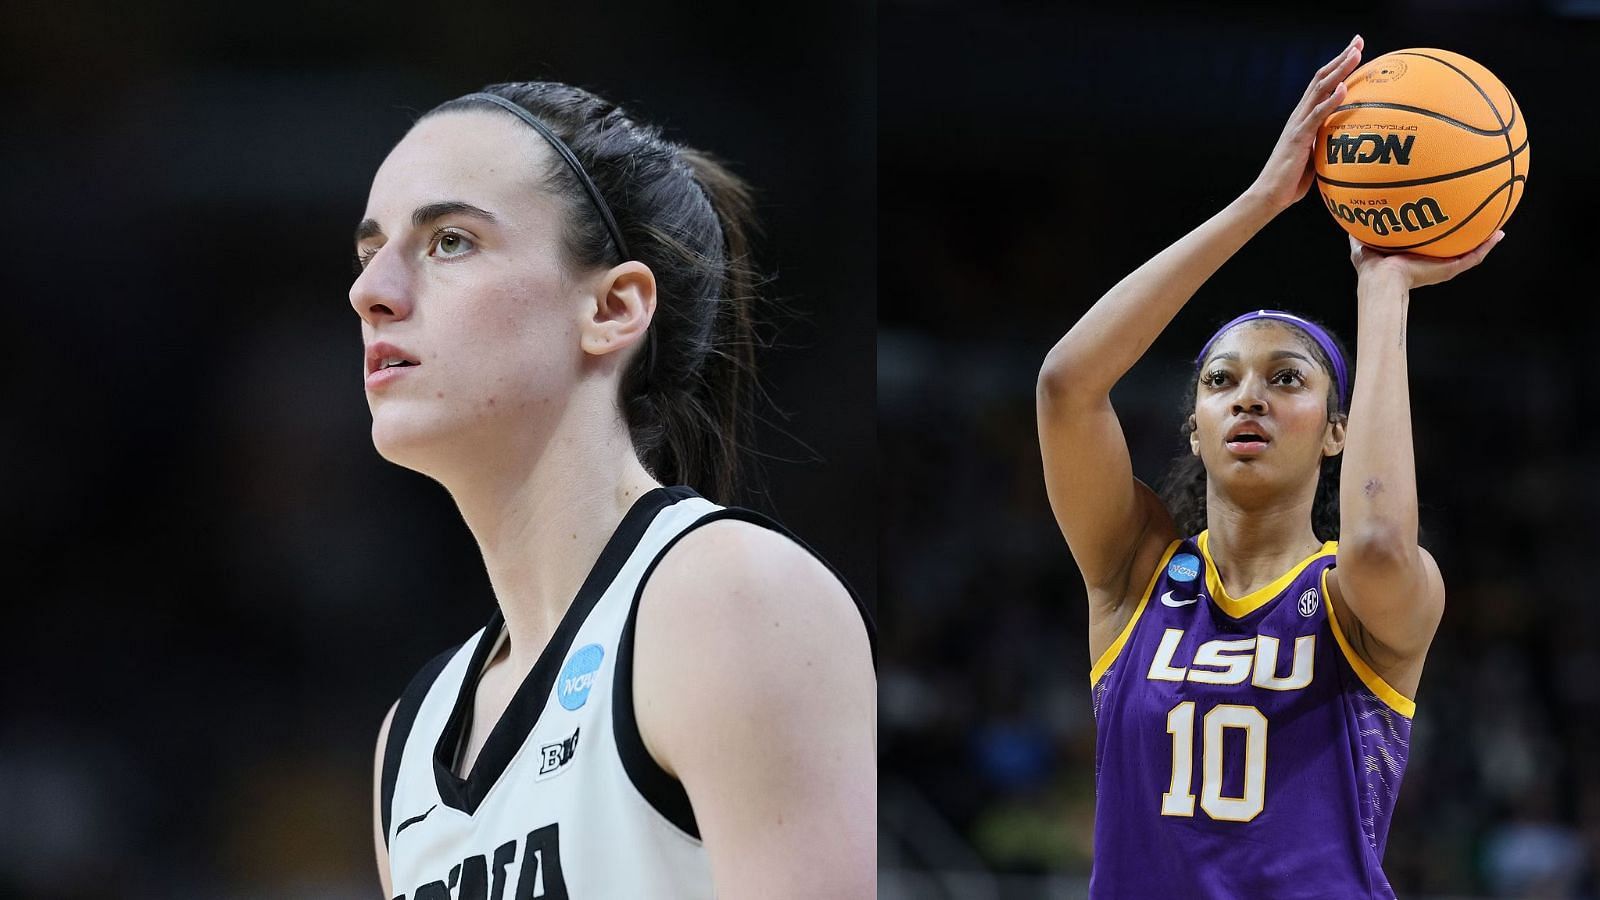 Caitlin Clark and Angel Reese will do battle for a regional final tonight in another epic Iowa/LSU game.